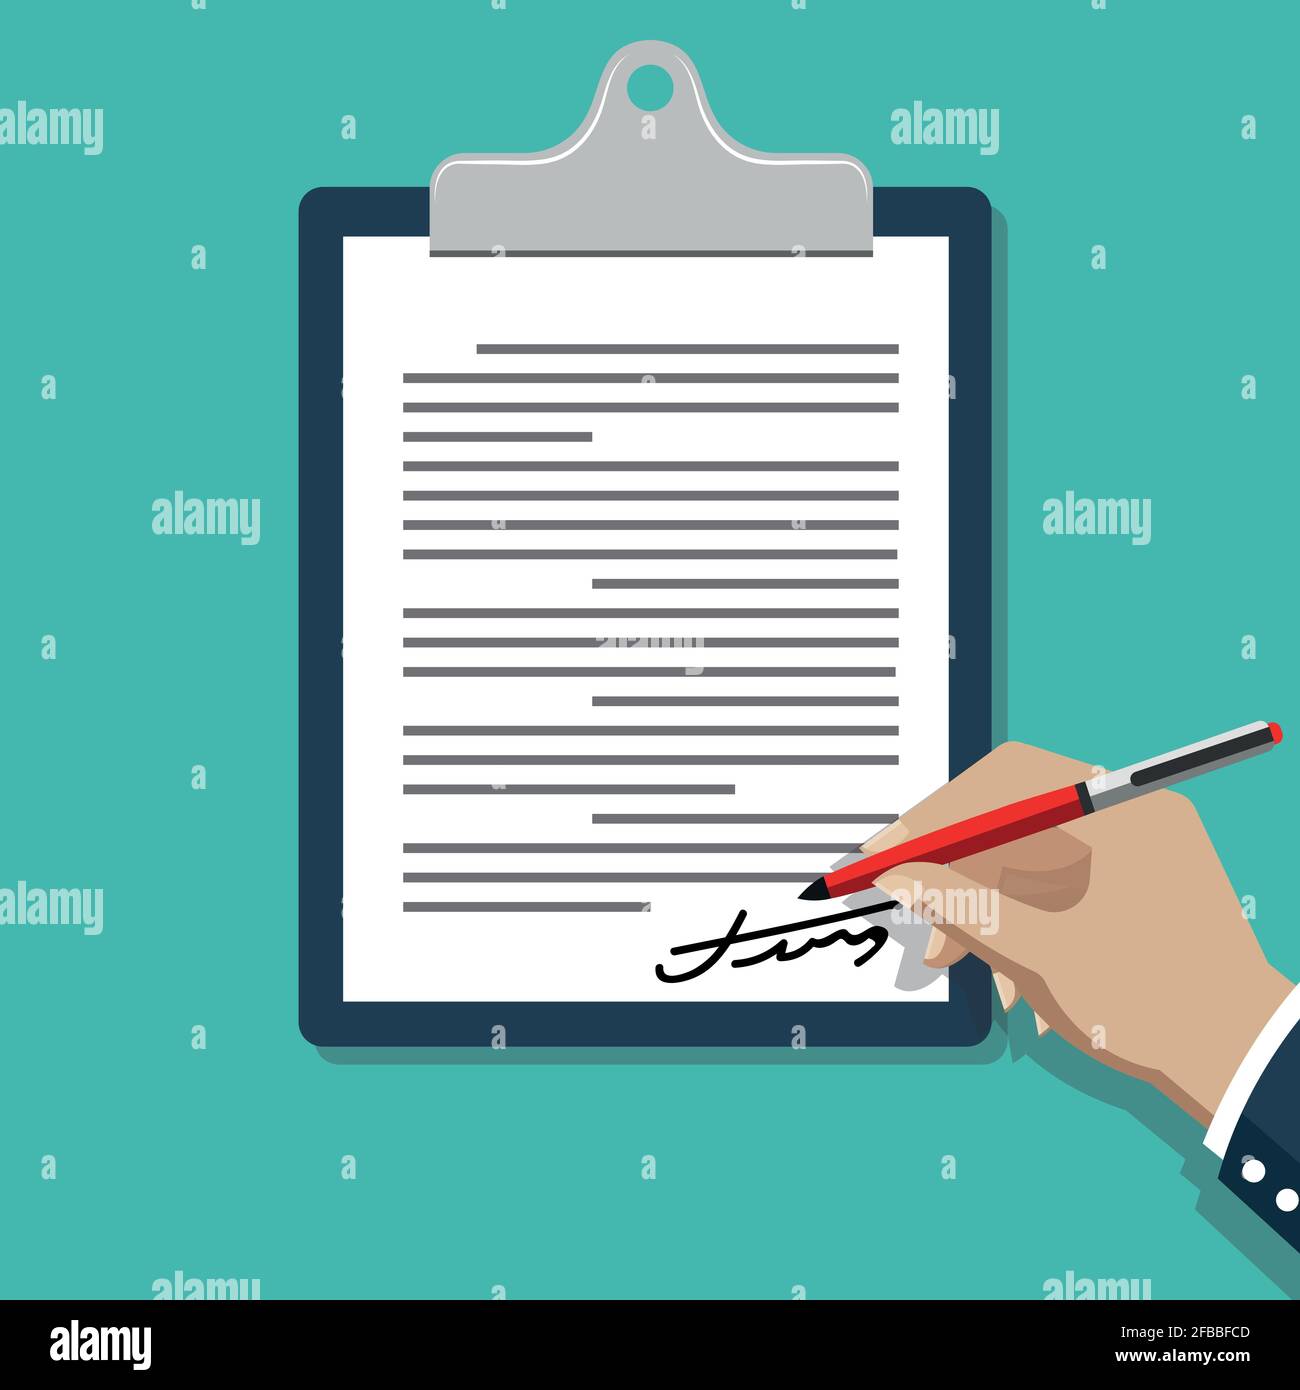 Hand signing document. Man writing on paper contract documents